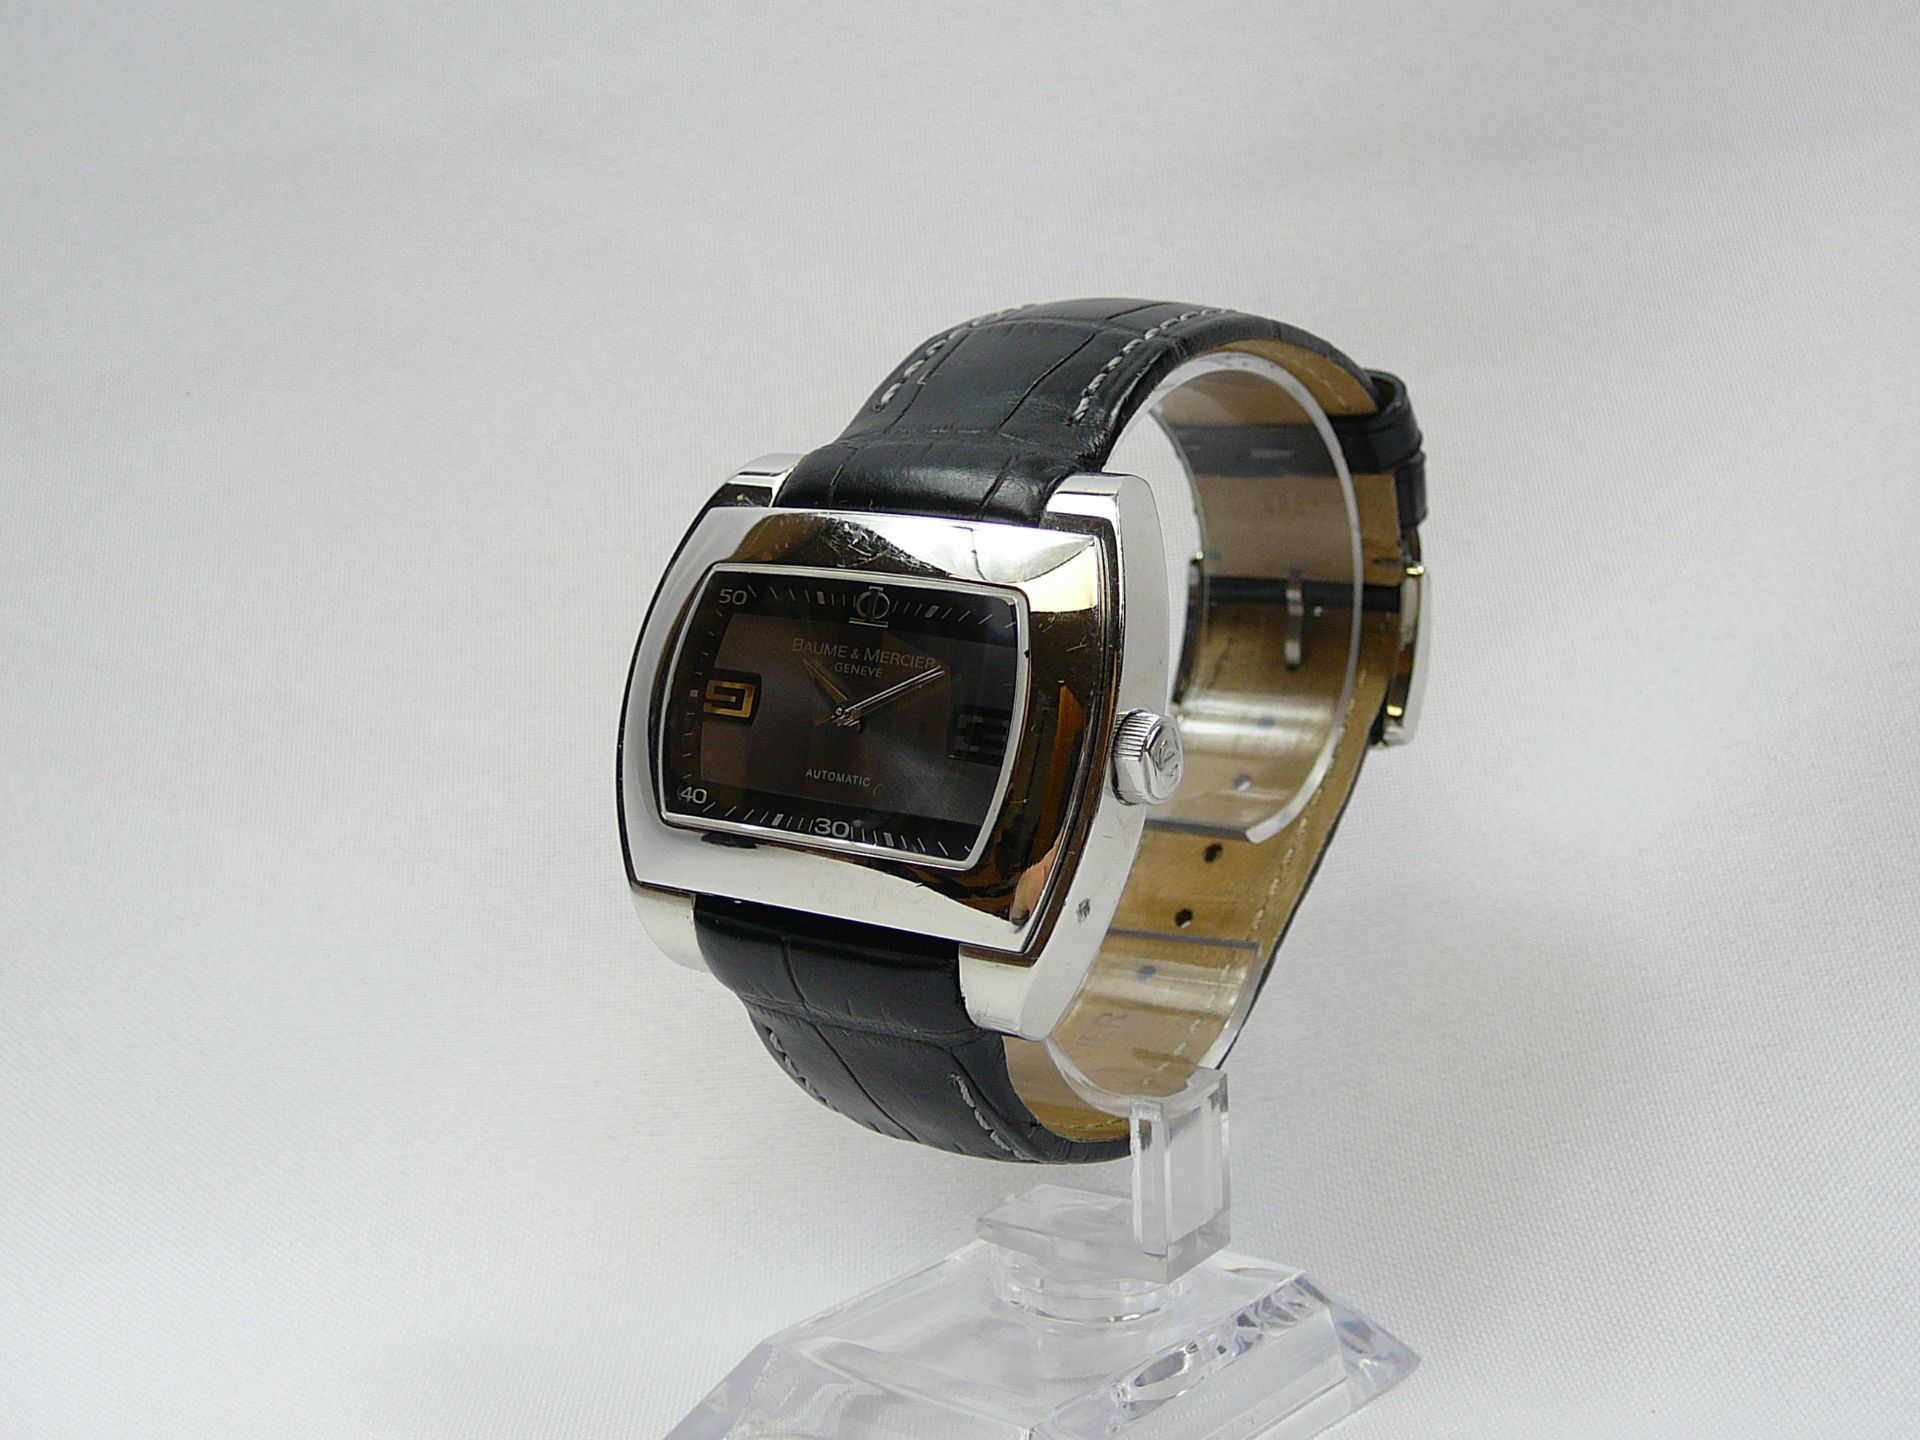 Gents Baume and Mercier Wristwatch - Image 2 of 3